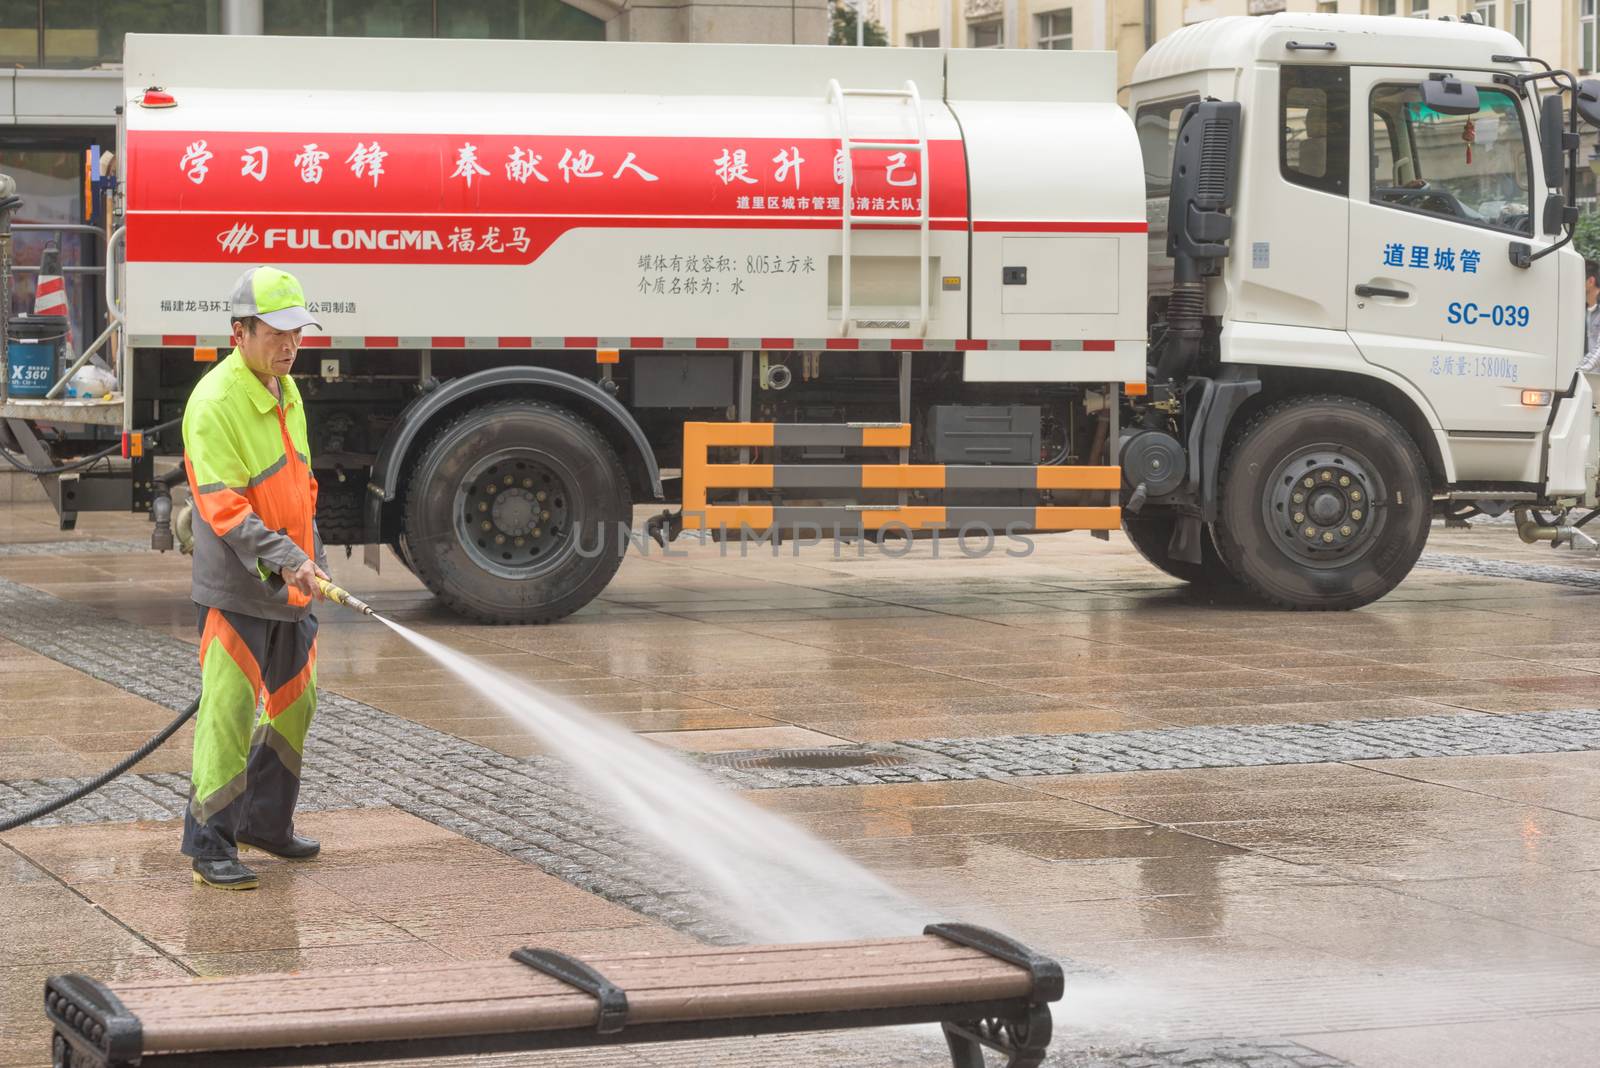 Harbin, Heilongjiang, China - September 2018: Man washes the pavement. Worker cleaning the street